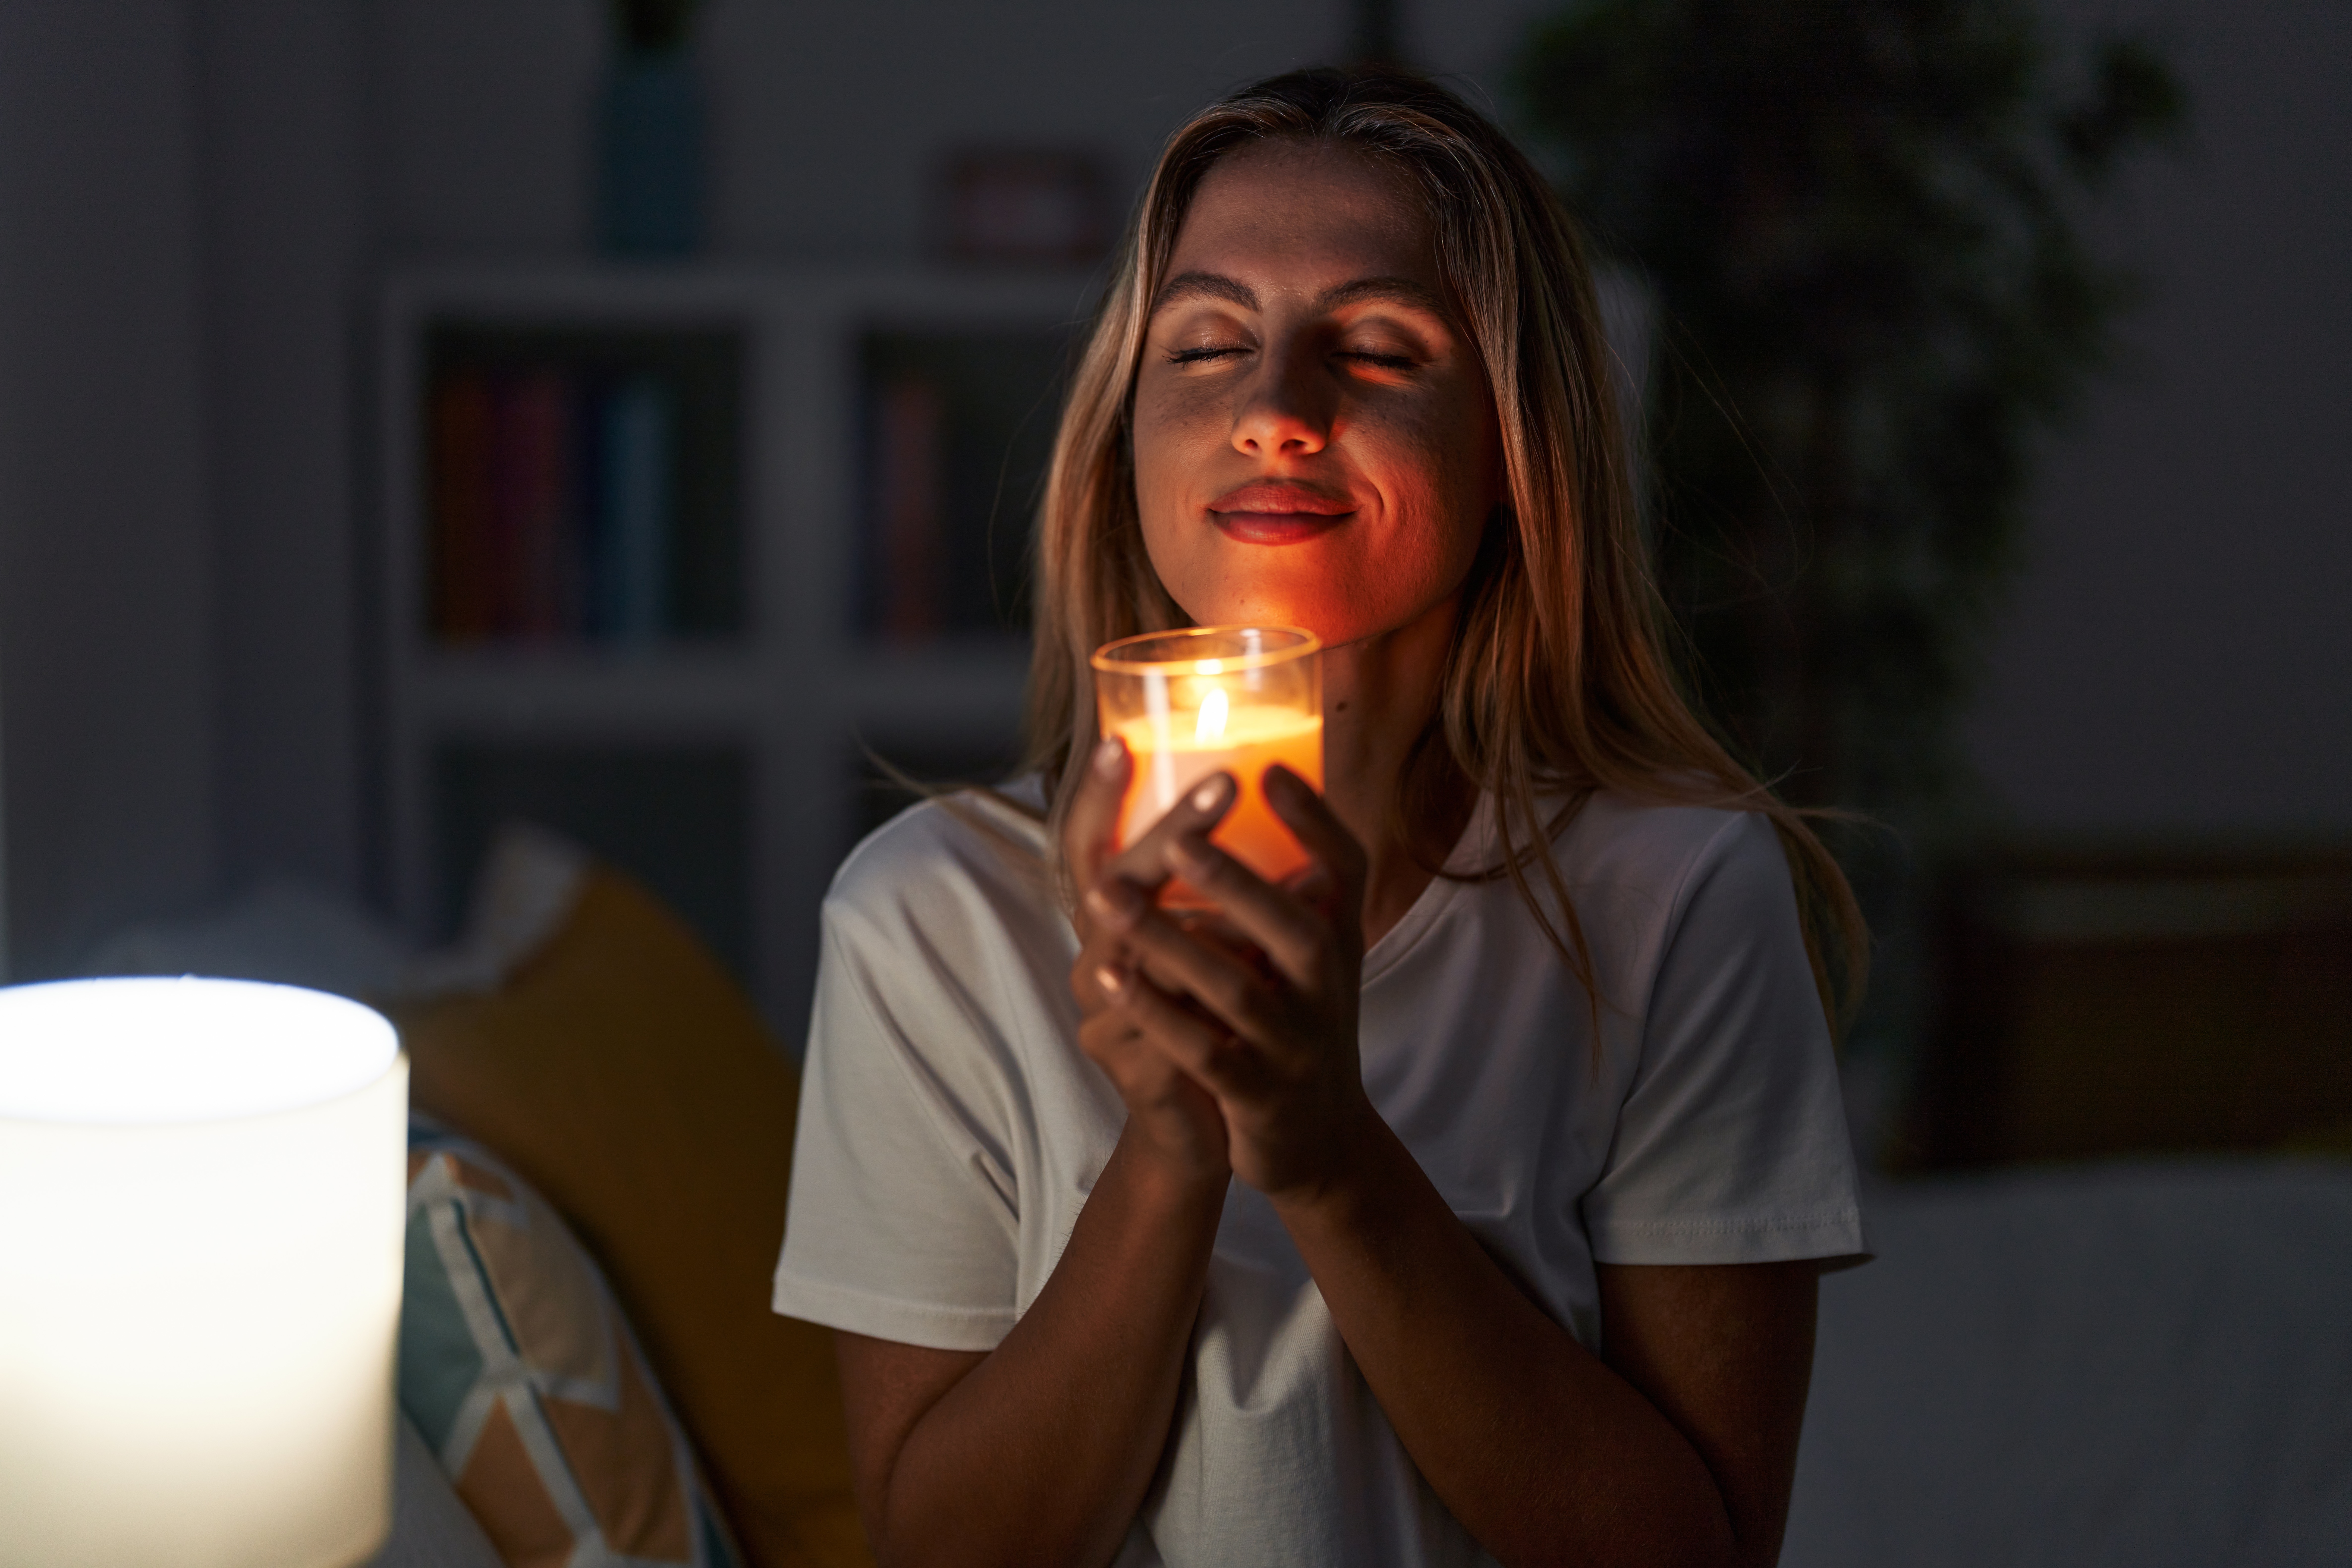 Avoid overhead lights and use a lamp or, even better, a candle